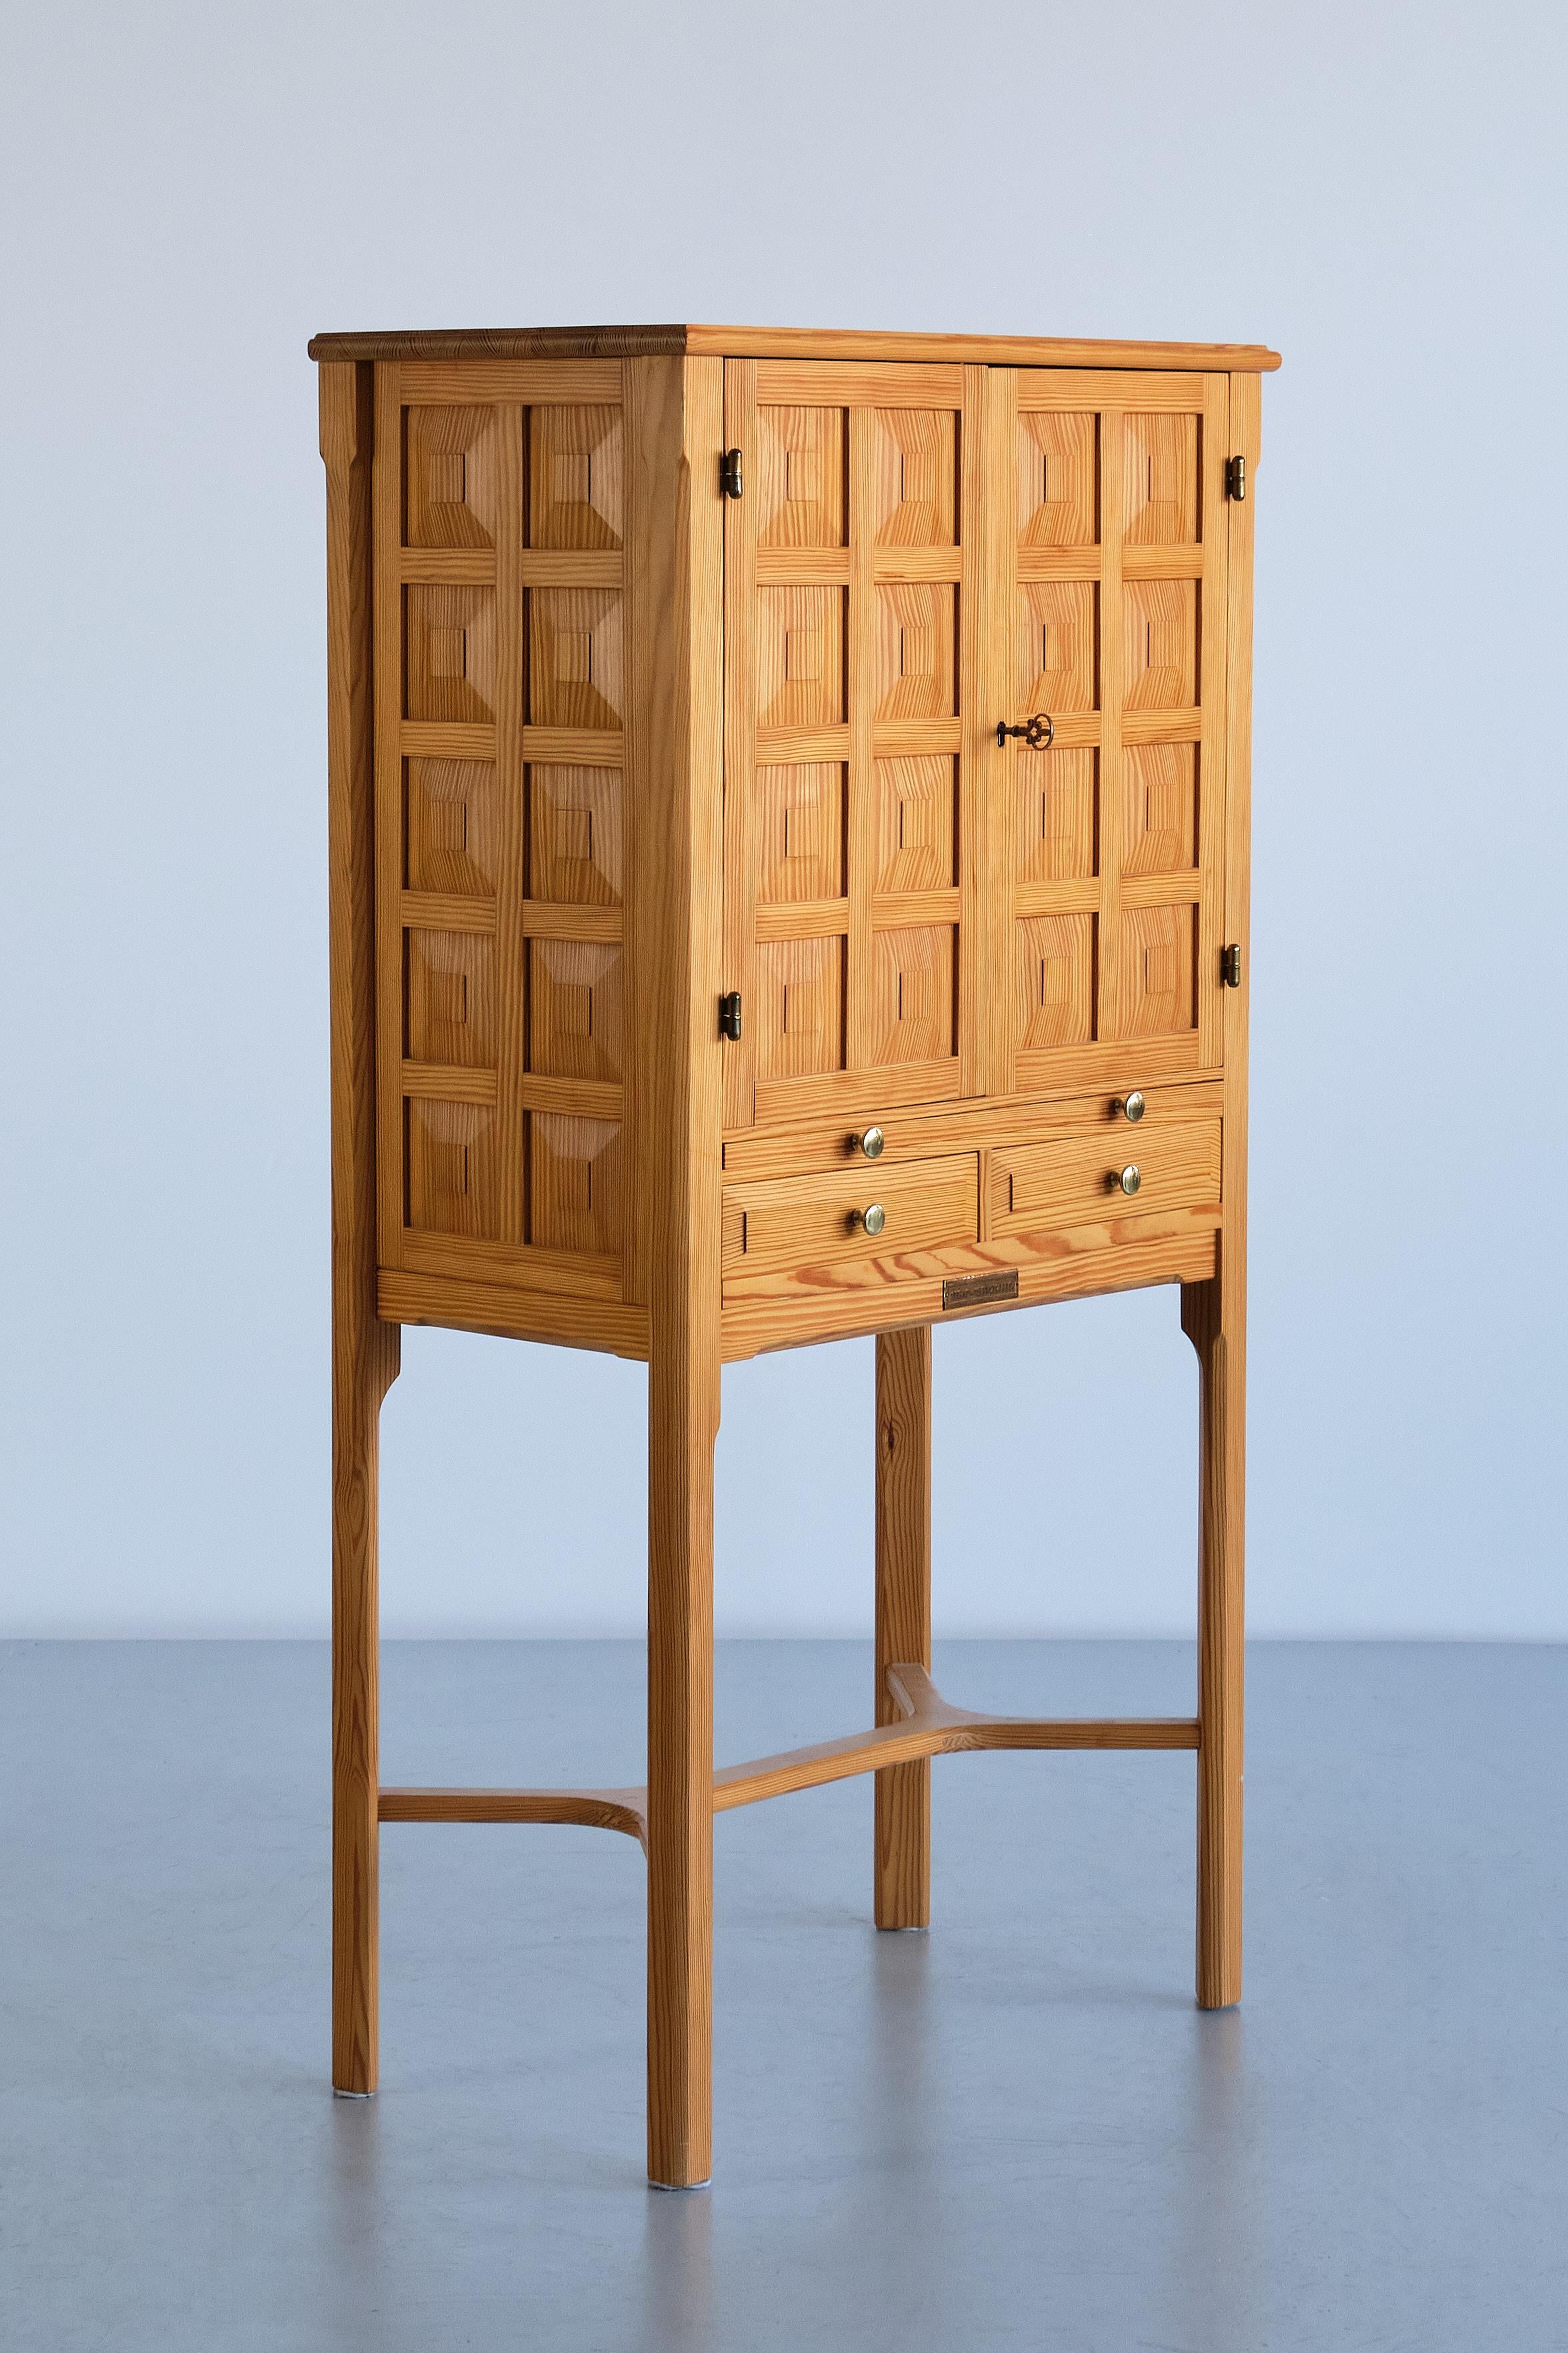 Swedish Ulf Ekdahl Cabinet in Solid Pine Wood and Brass, Nybro, Sweden, 1979 For Sale